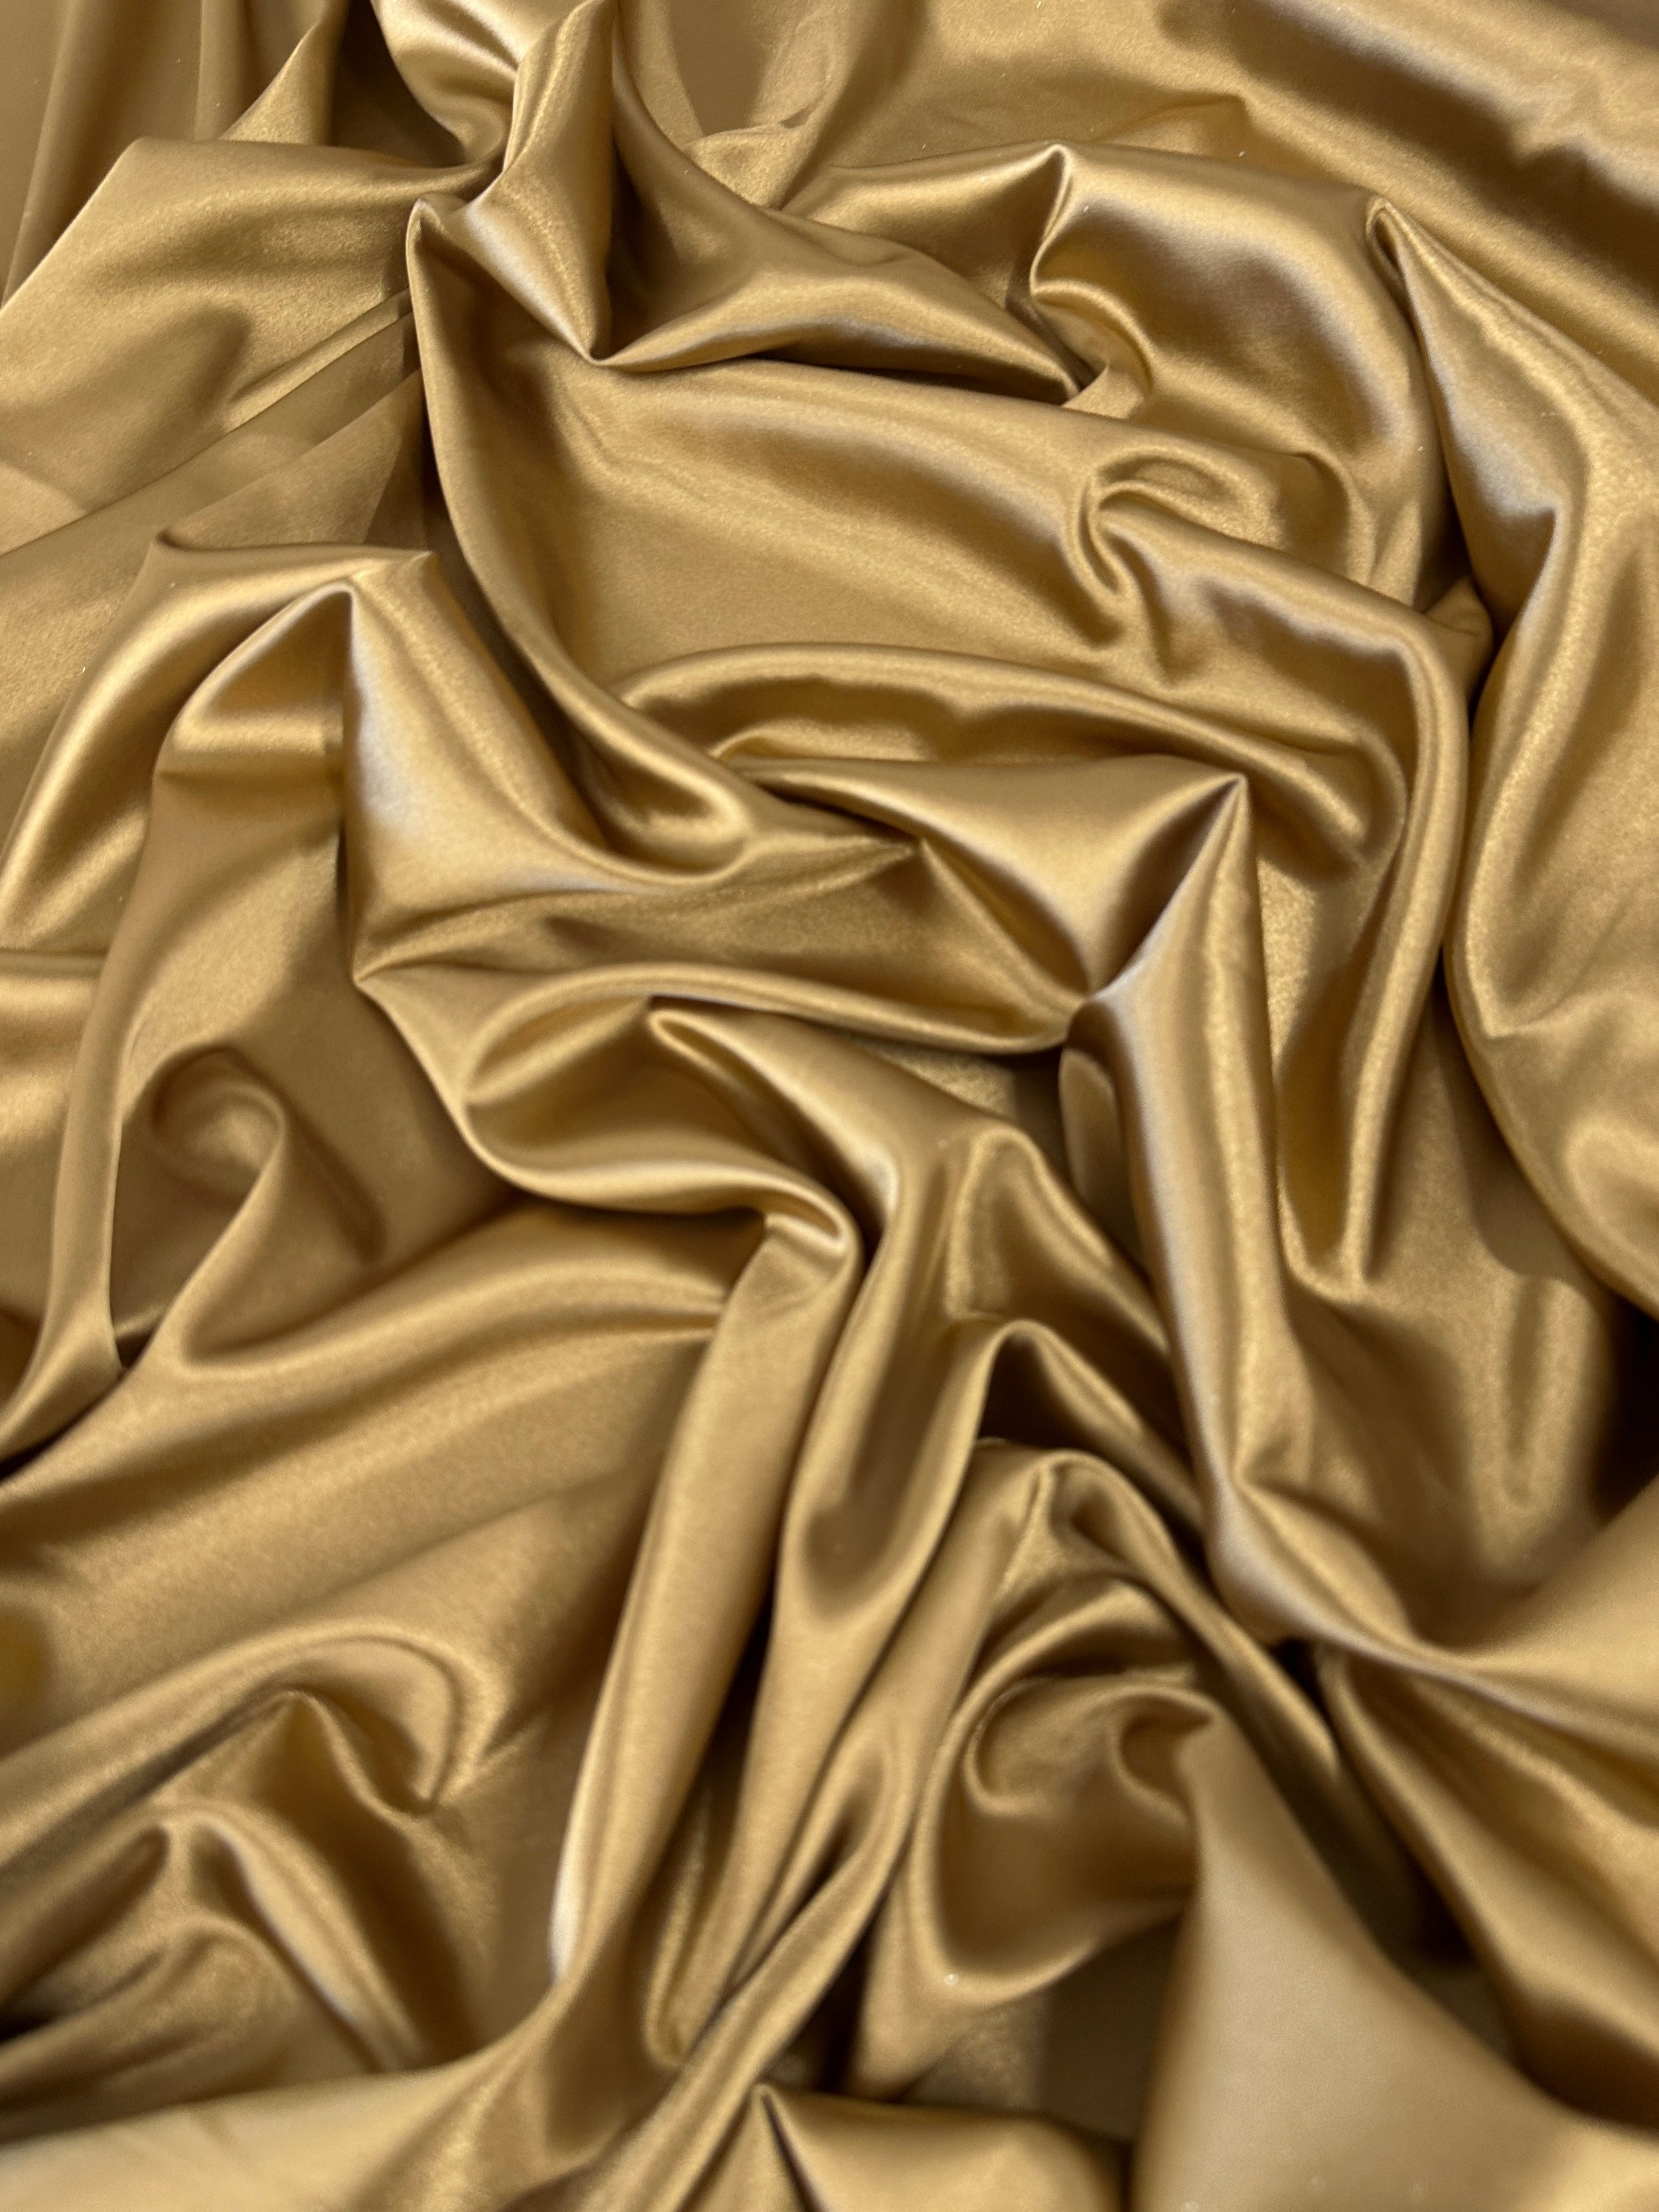 Gold stretch crepe back satin, gold color satin, bride fabric in gold color, satin in low price, discounted satin, satin on sale, silky smooth gold color satin, dusty gold fabric for woman, gold color gown, gold bridal dress